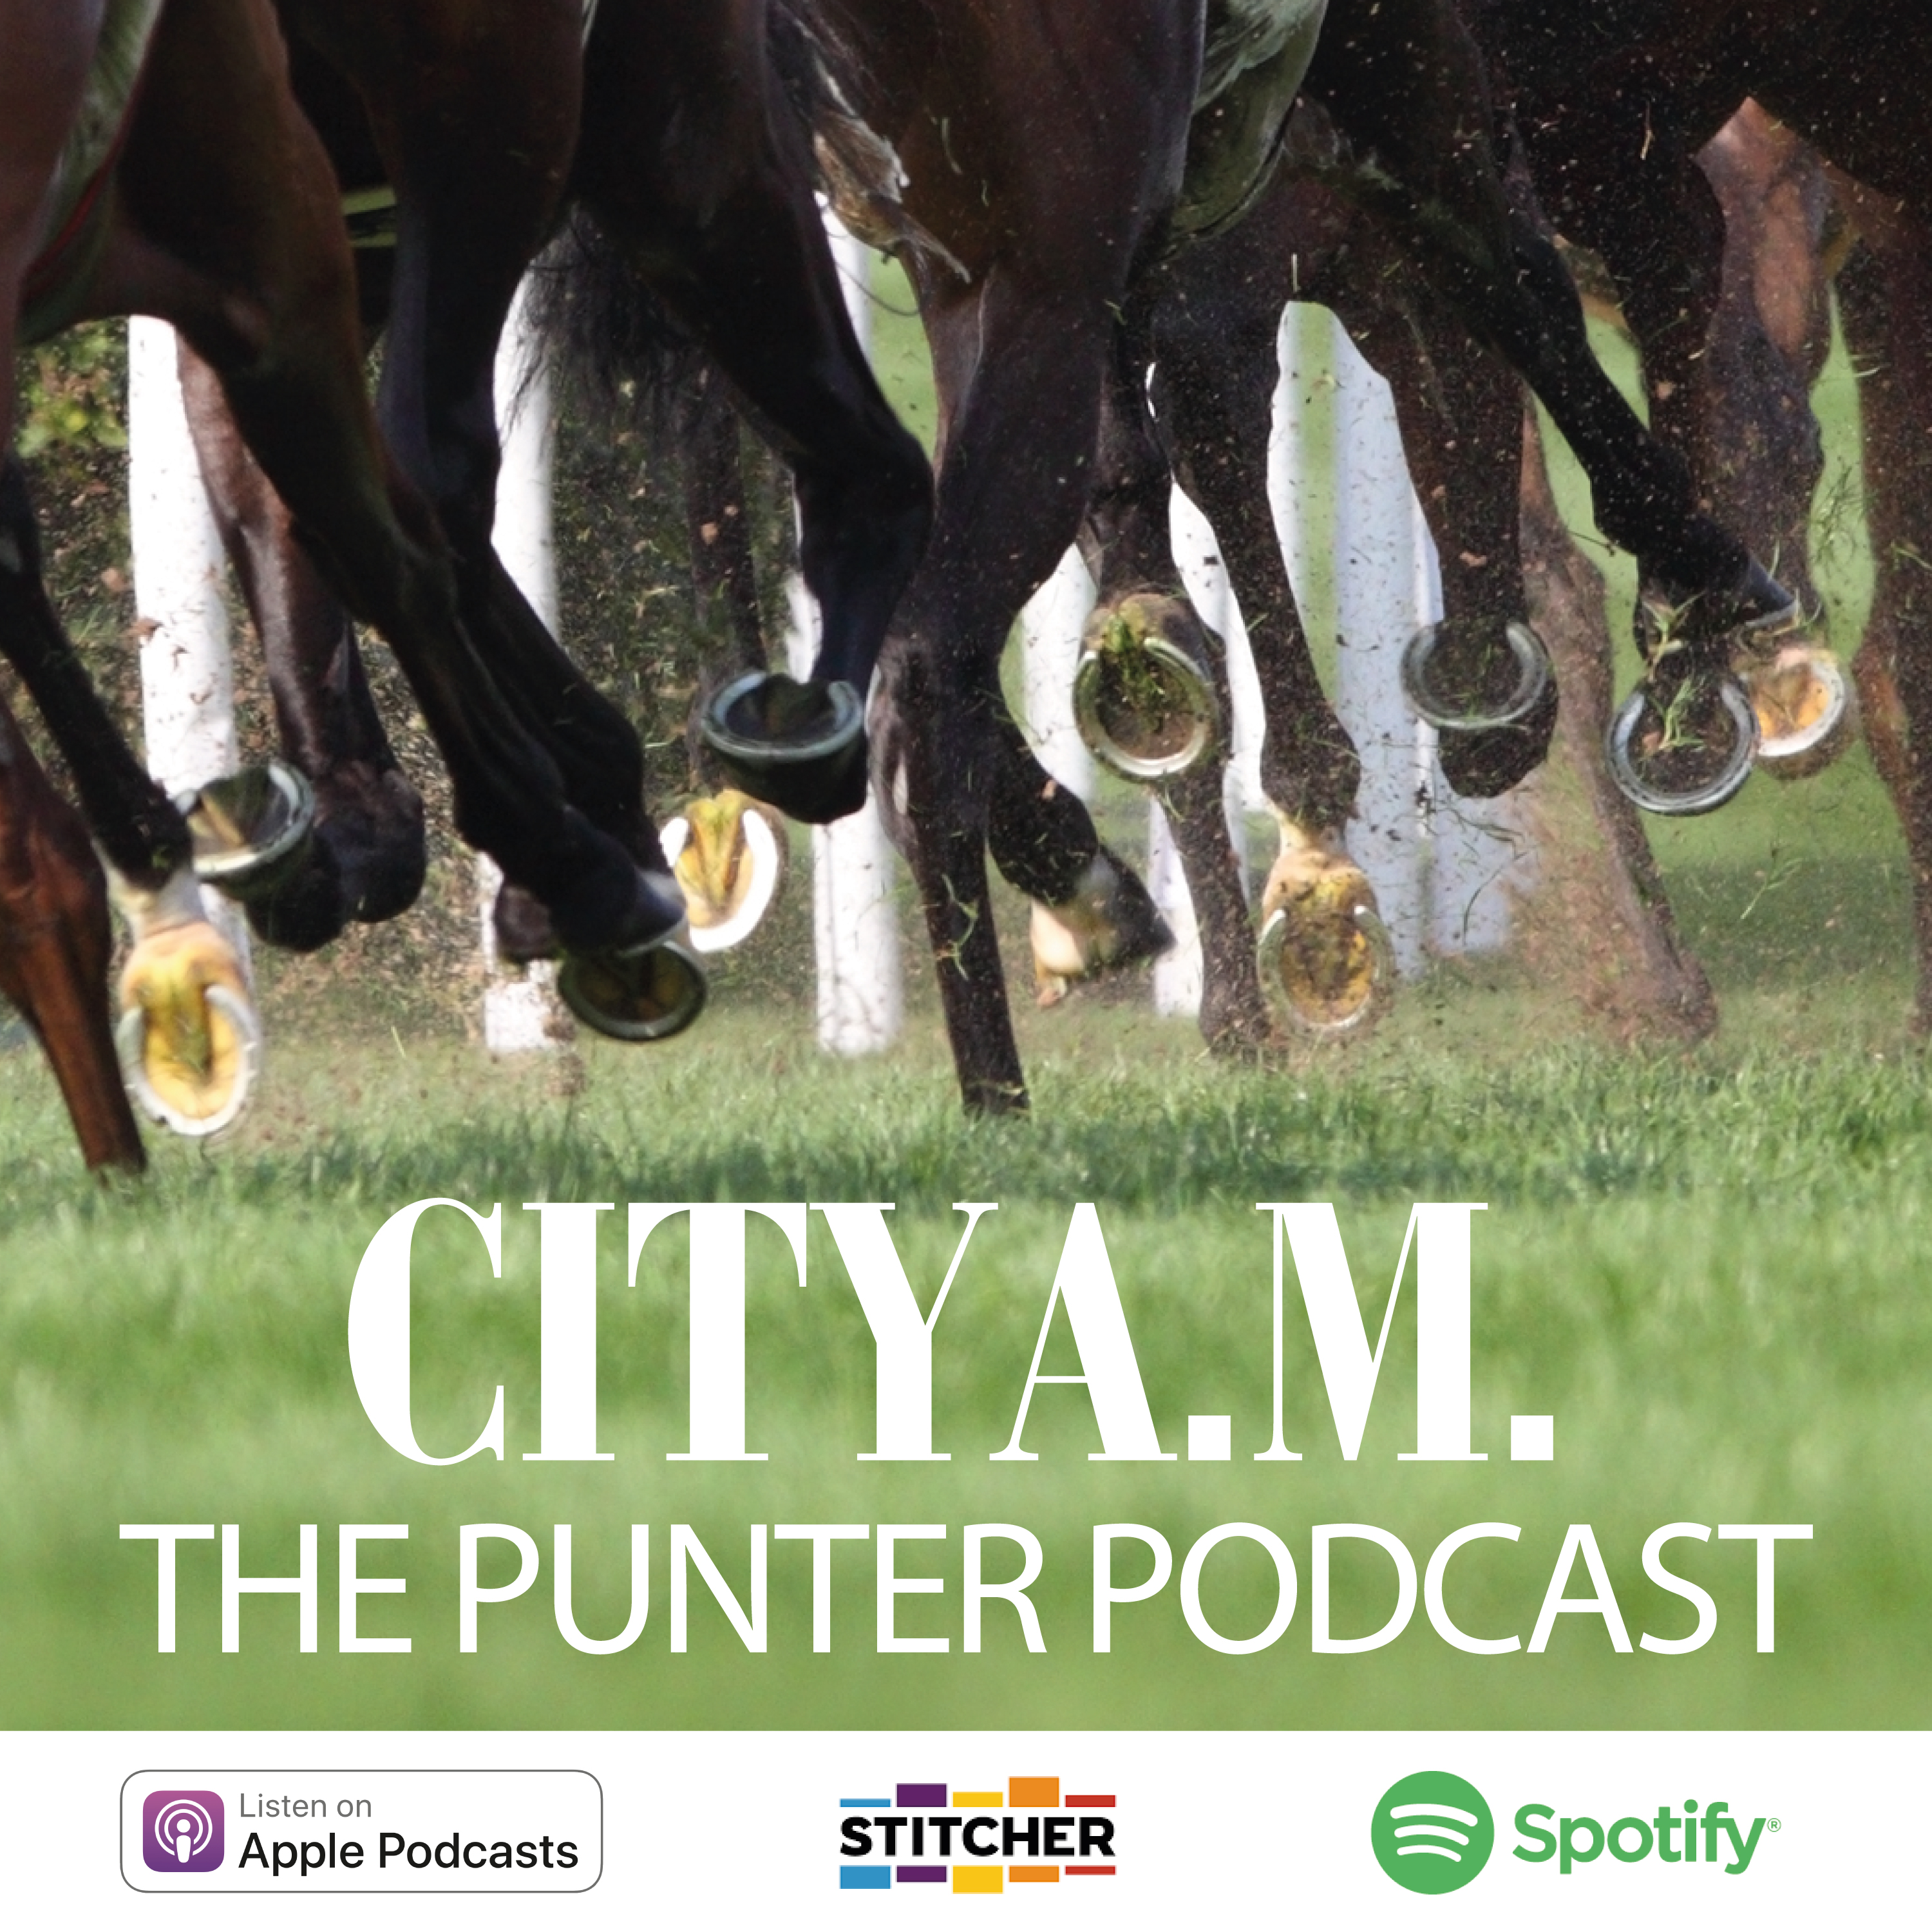 March 11th - Punter Podcast Summary